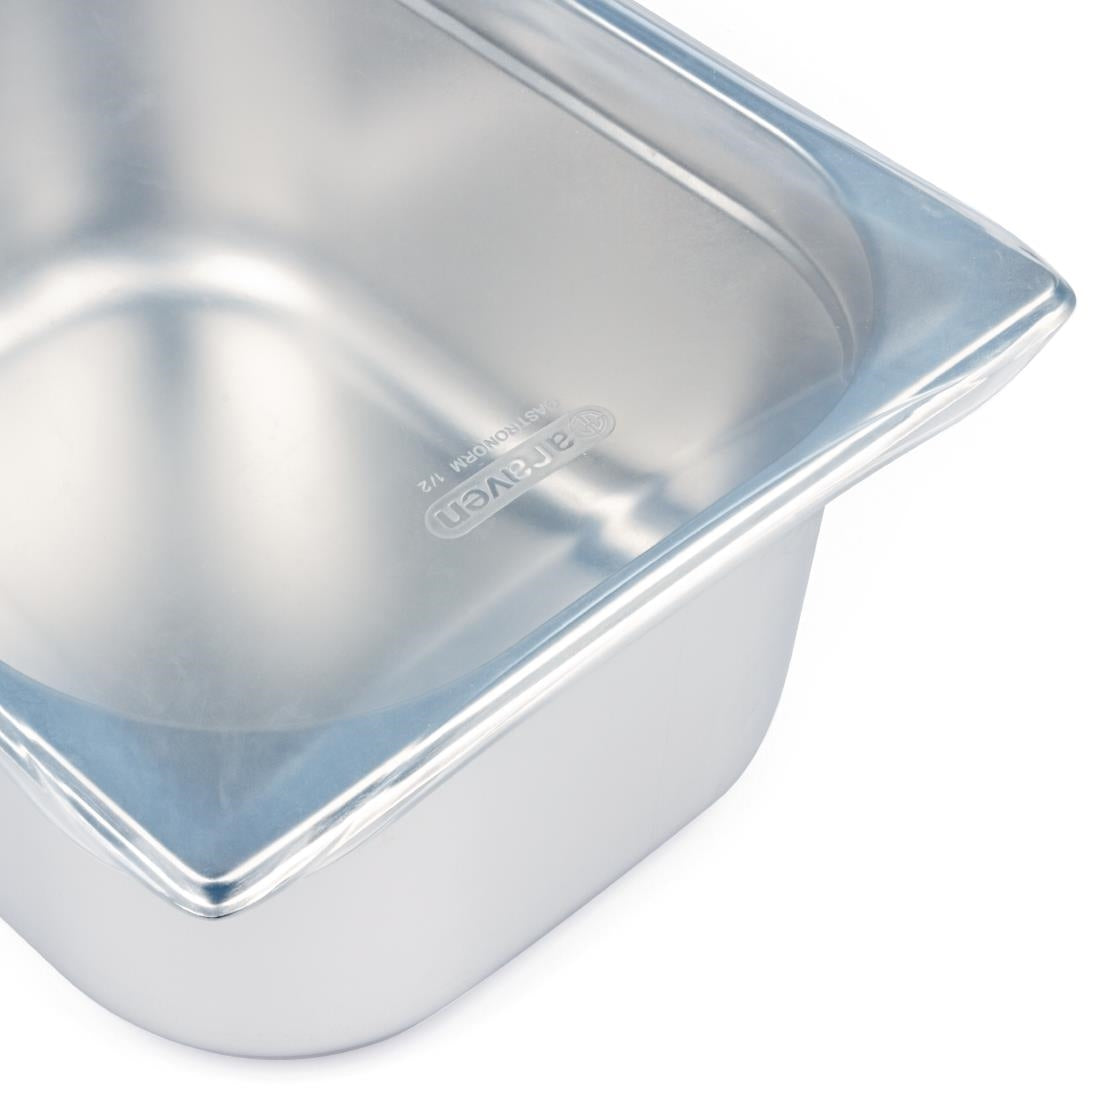 GG801 Araven Silicone 1/2 Gastronorm Lid JD Catering Equipment Solutions Ltd